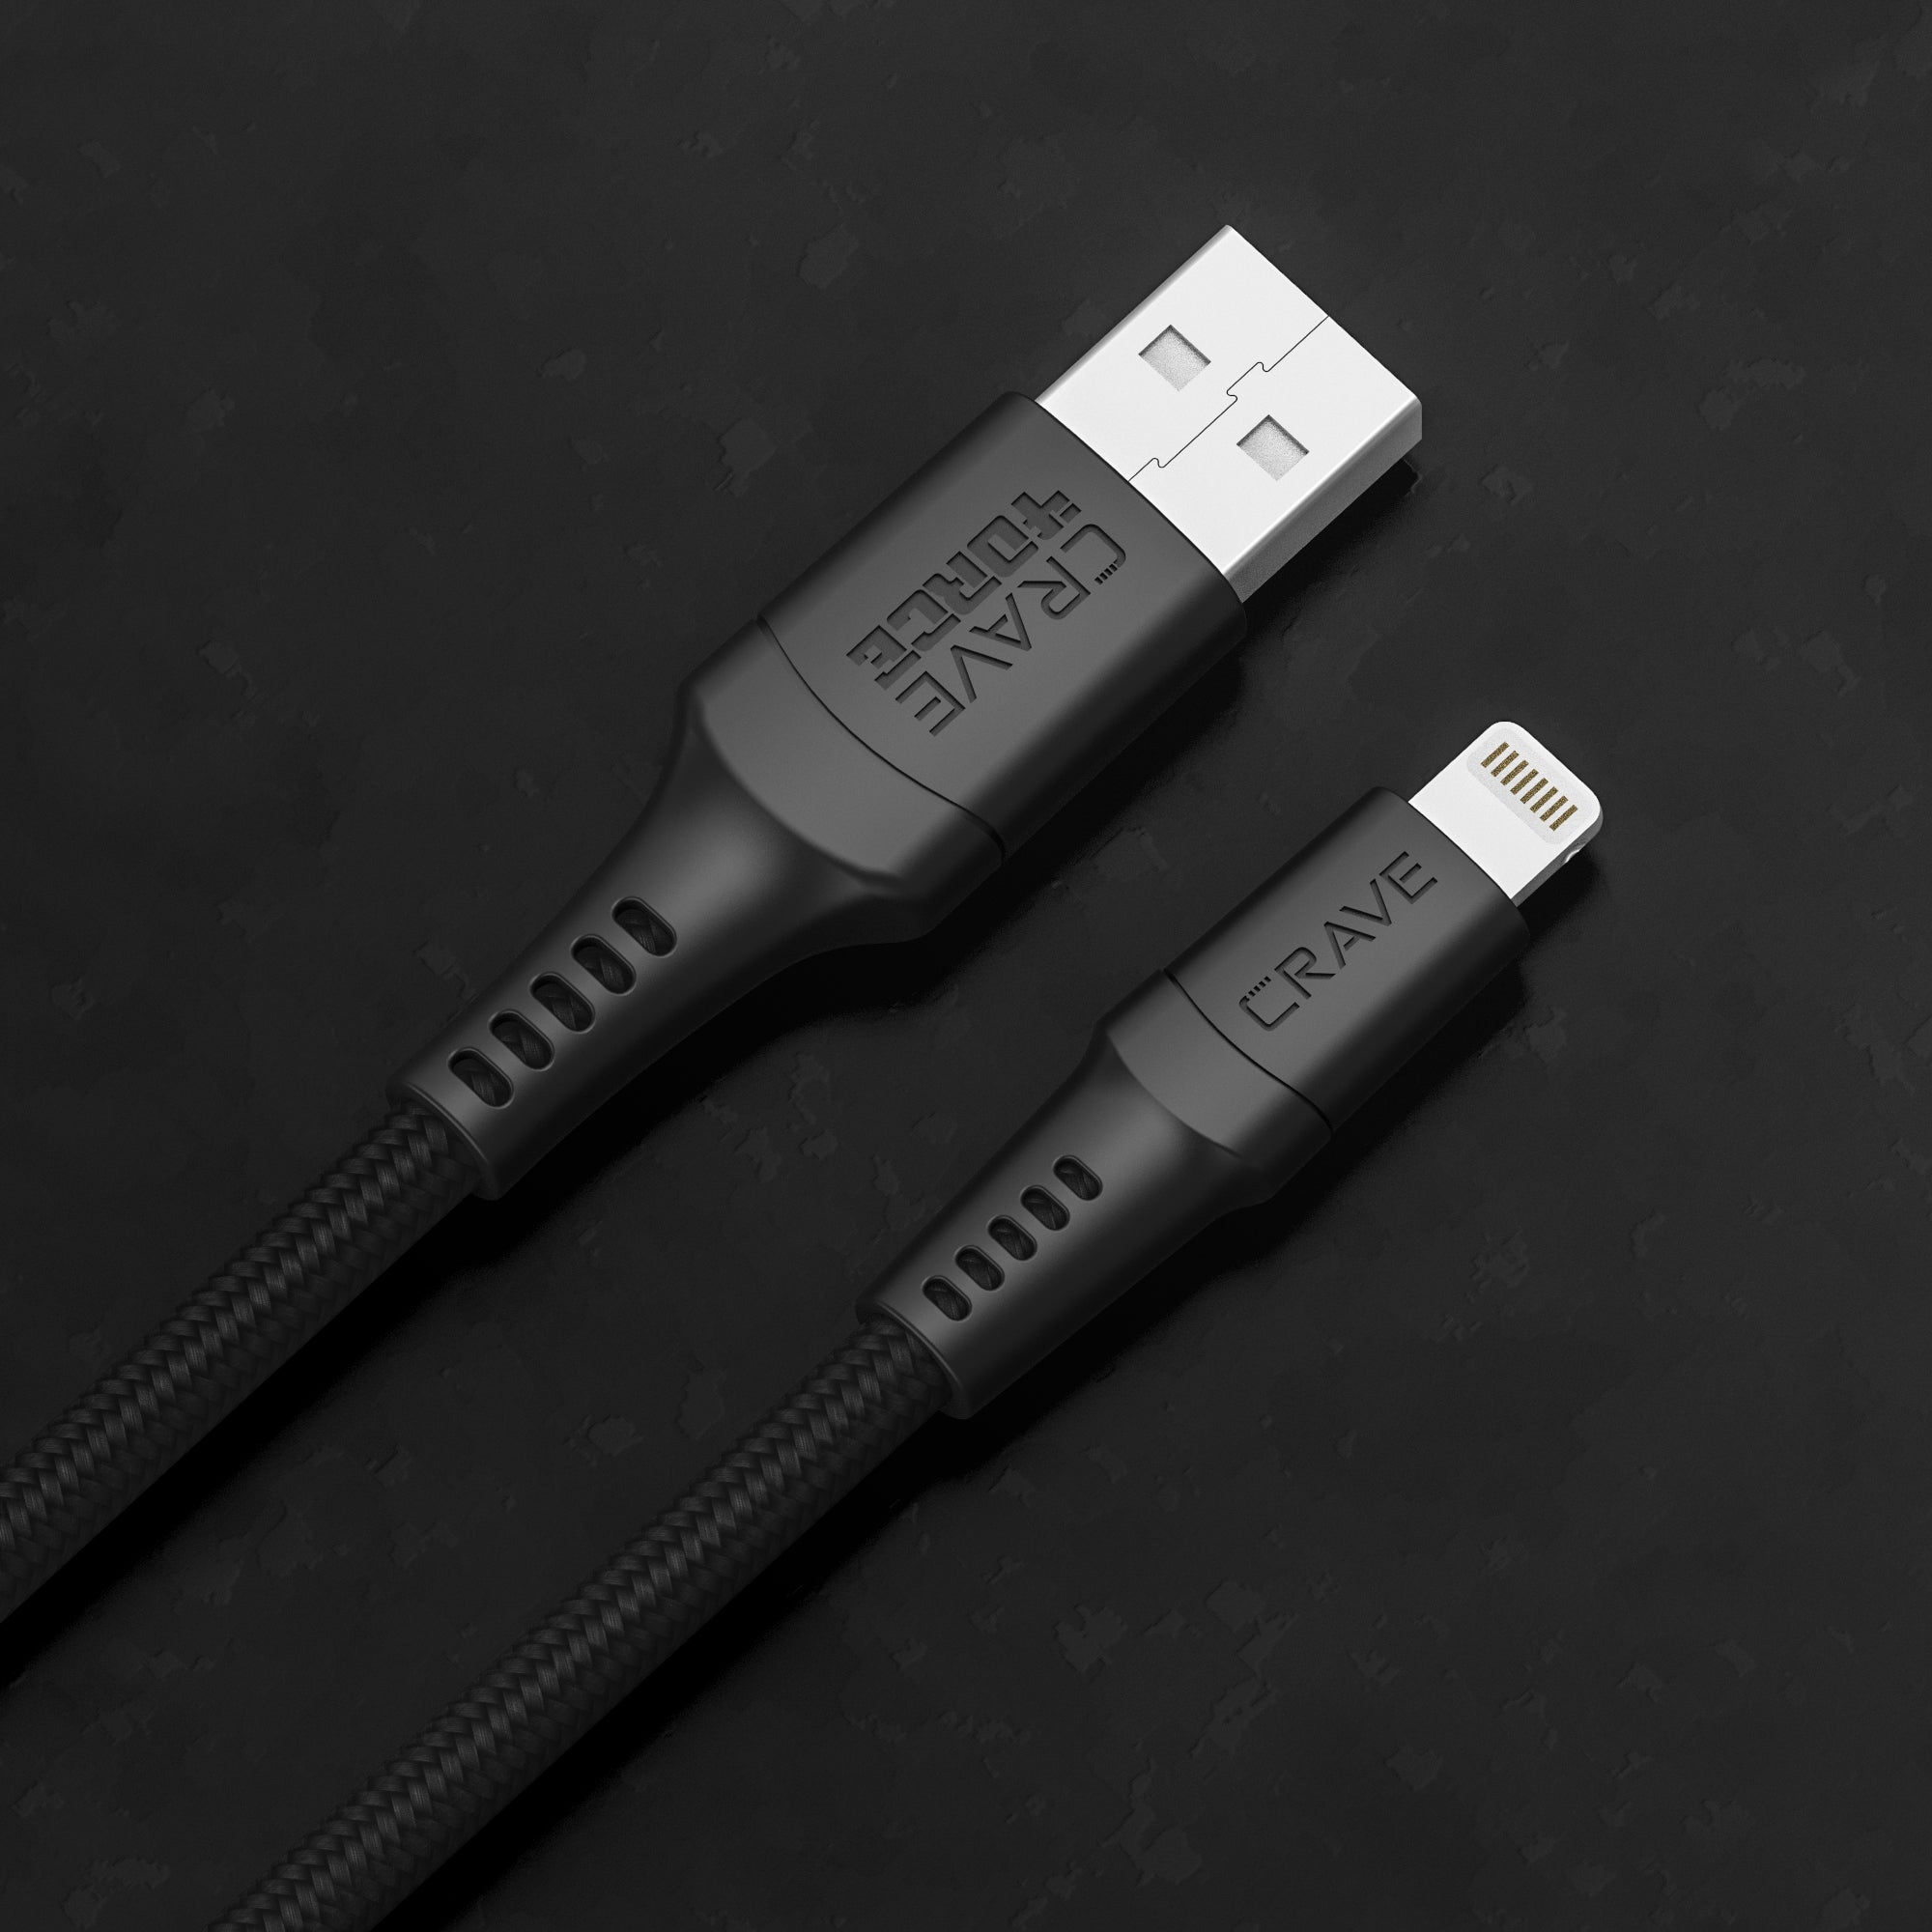 4ORCE Cable - 4 ft Lightning to USB-A Black